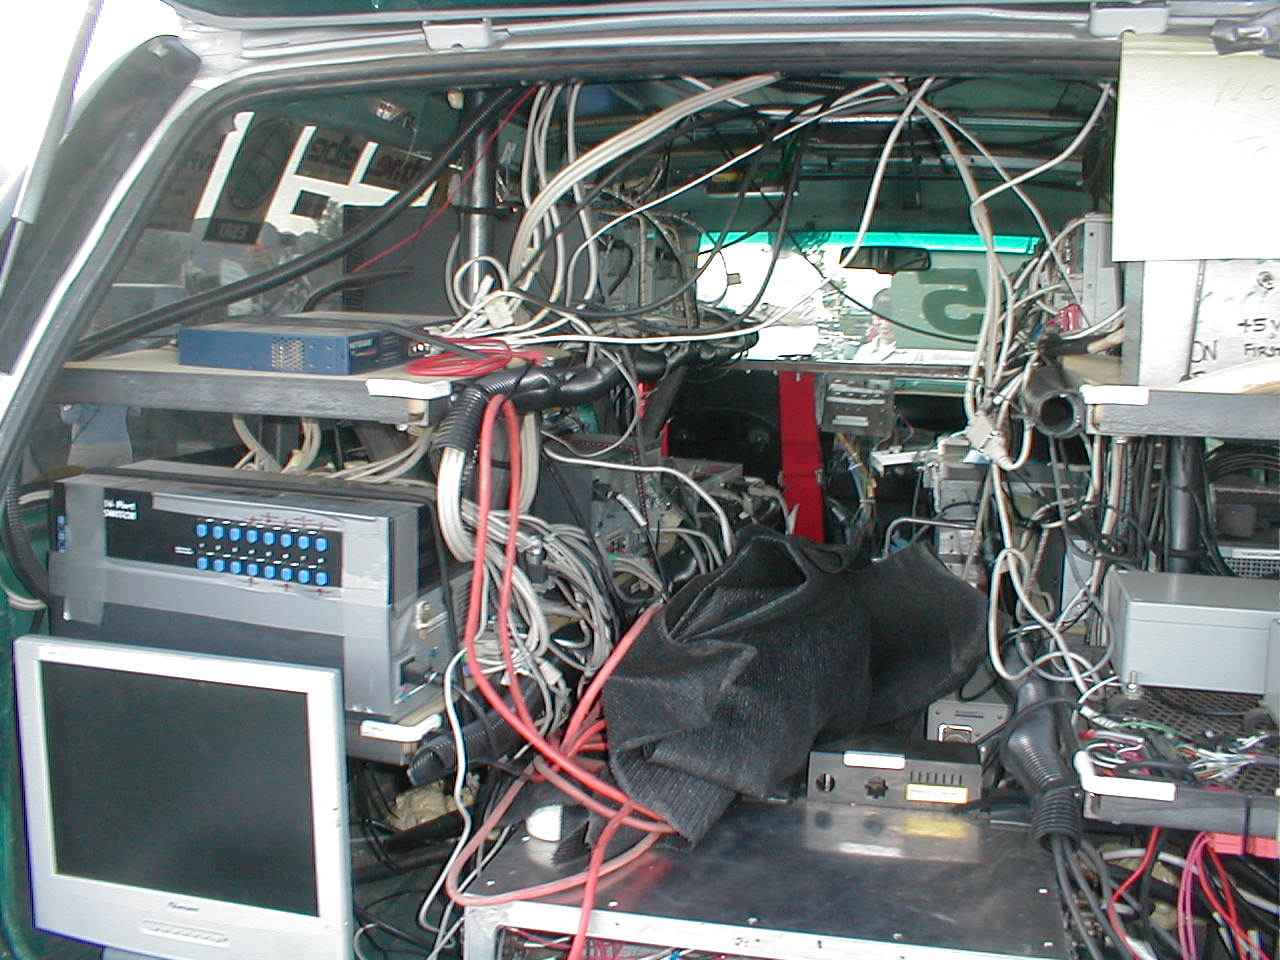 CalTech's vehicle was run by a team of personal computers, networked together